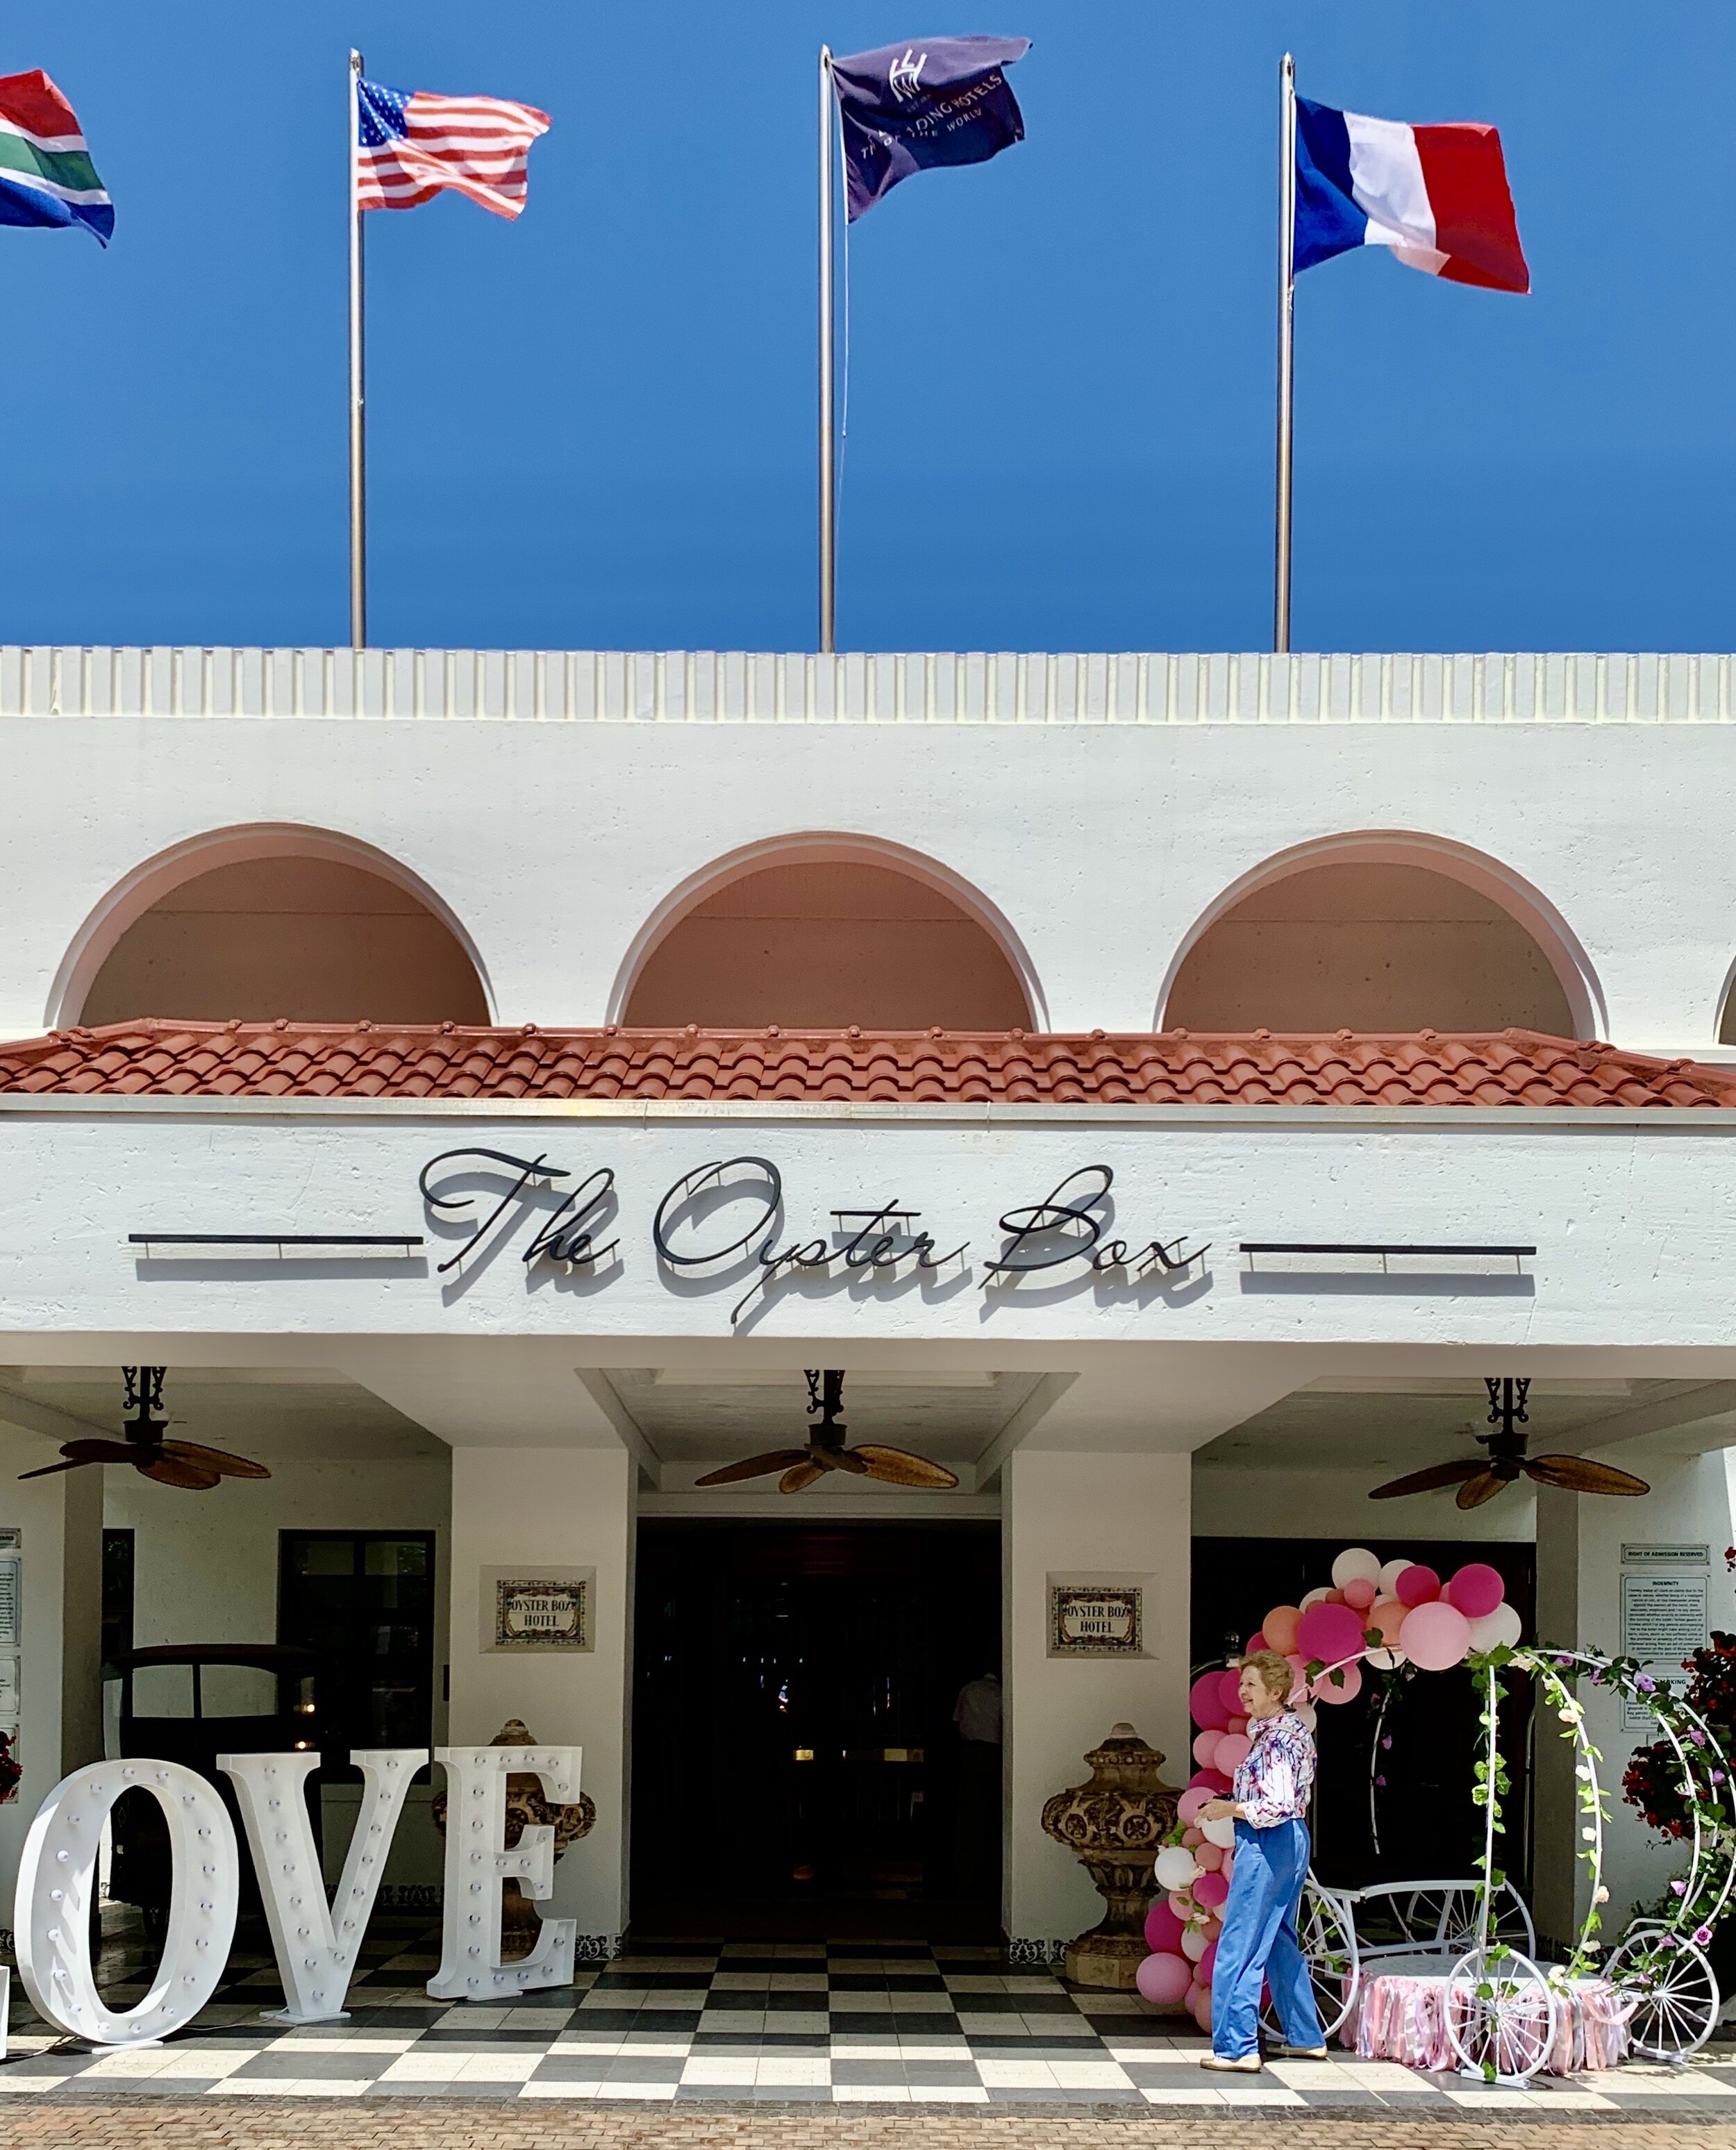  The beautiful Oyster Box hotel.  